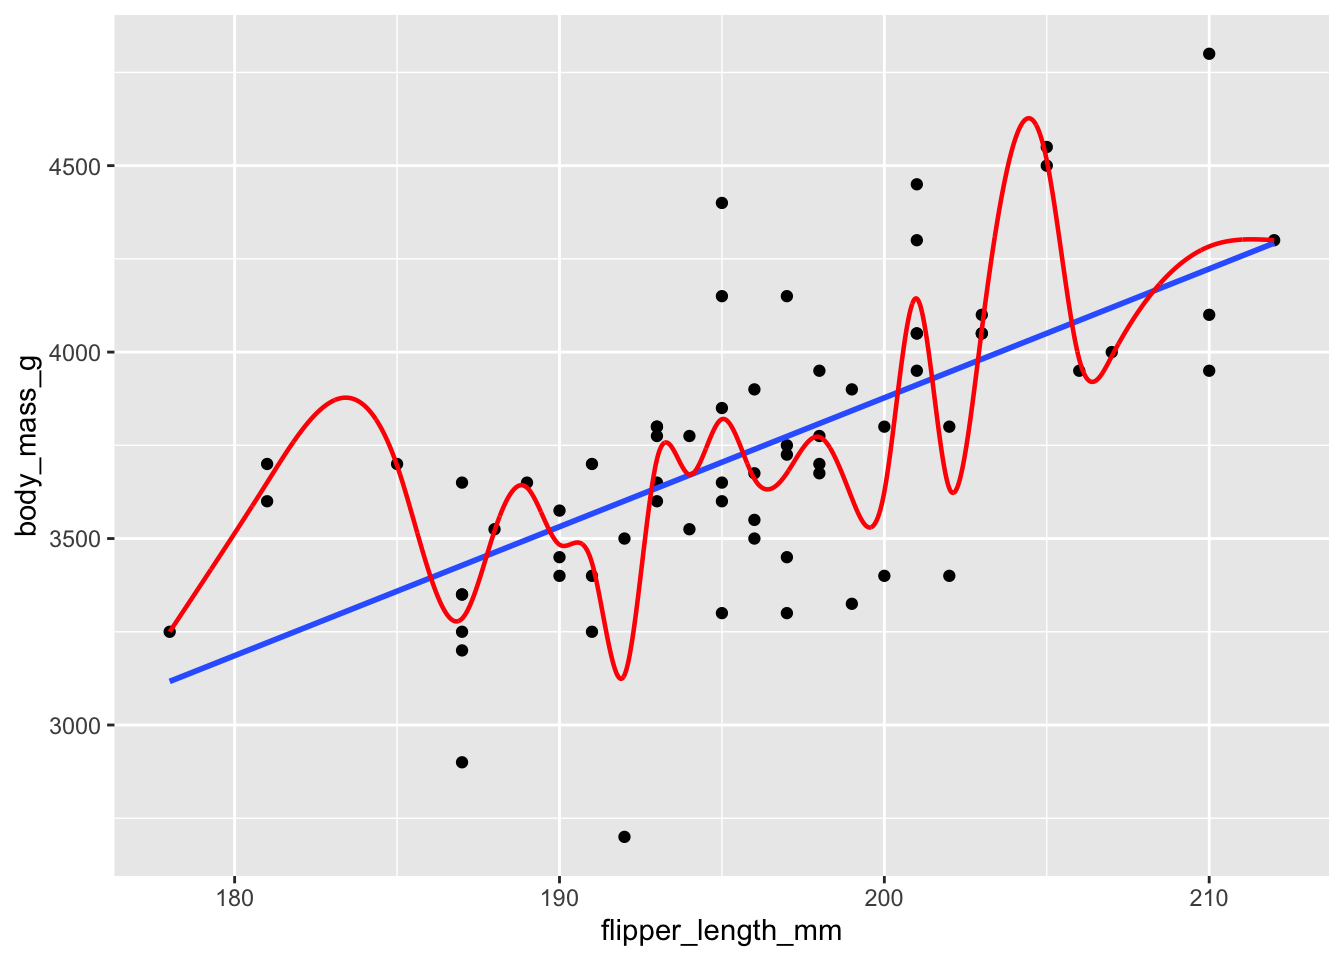 Chinstrap penguin dimensions modeled by a linear function and a smooth spline.  Which model has more predictive power?